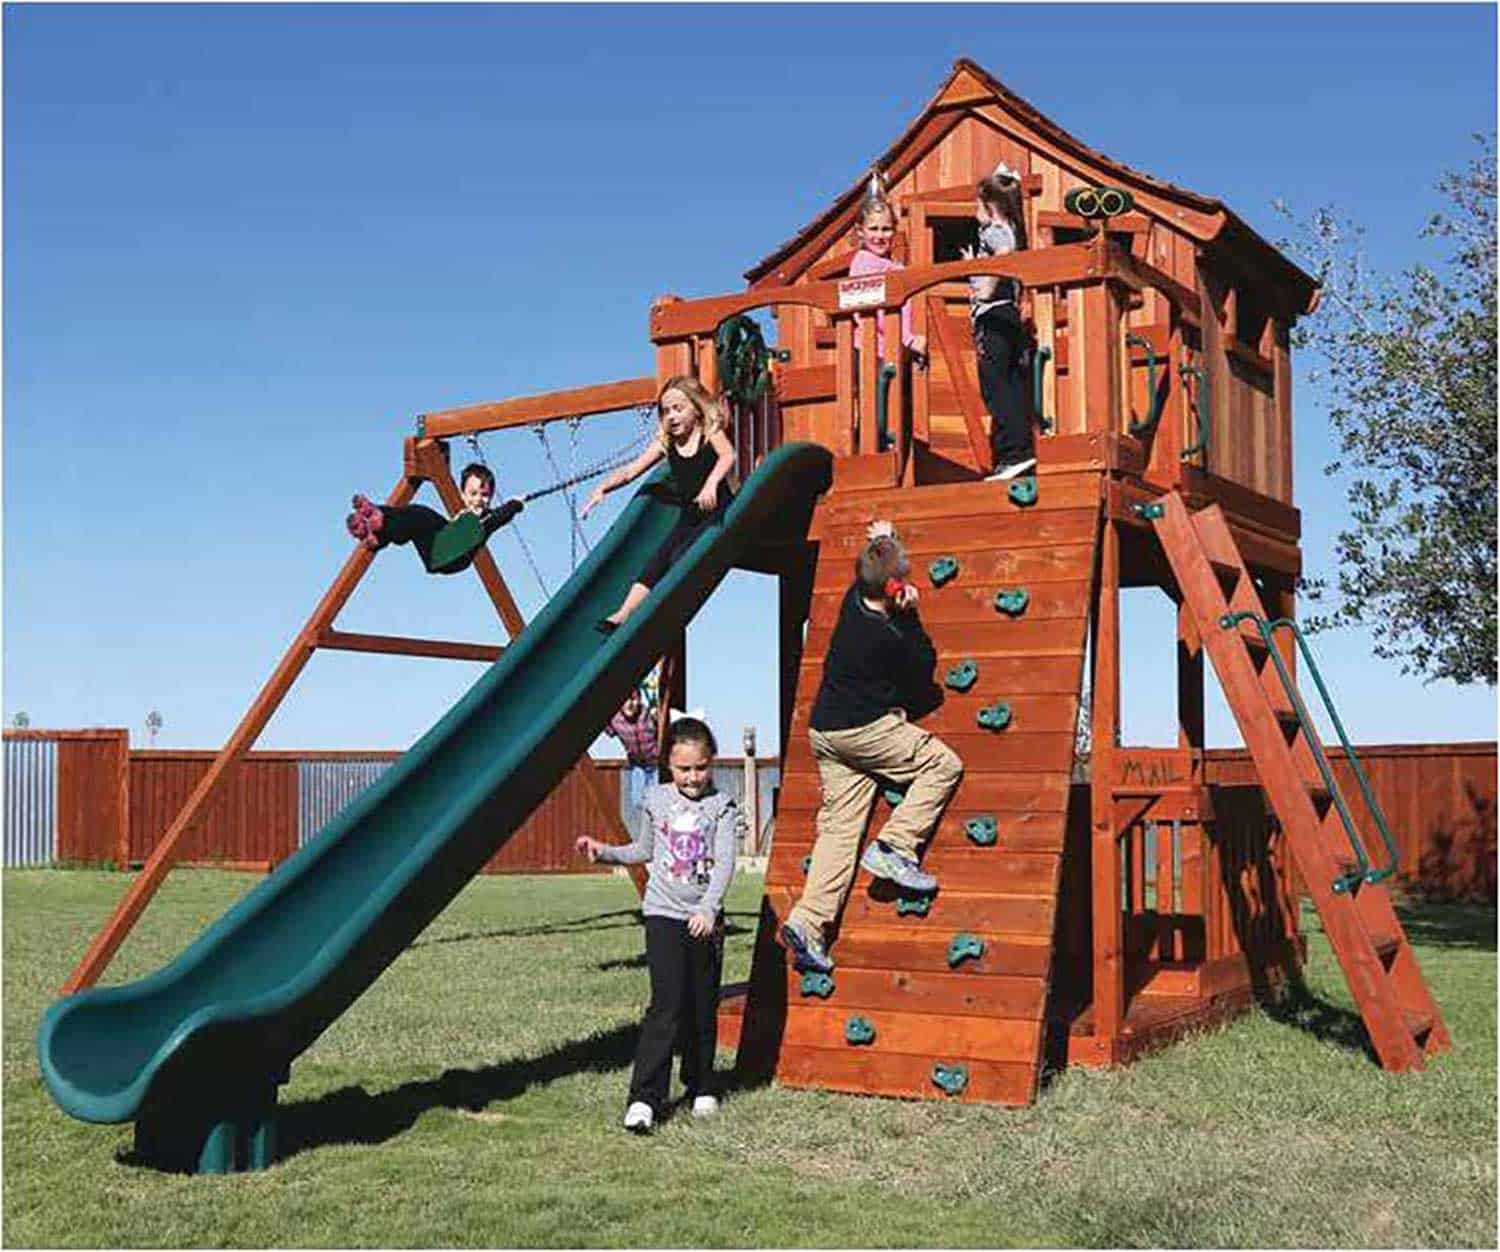 fort stockton swing set with upper cabin and patio. kids climbing rock wall and sliding down slide. Children swinging in belt swings. Lower level conversion has floor and open slat walls on this redwood playset.